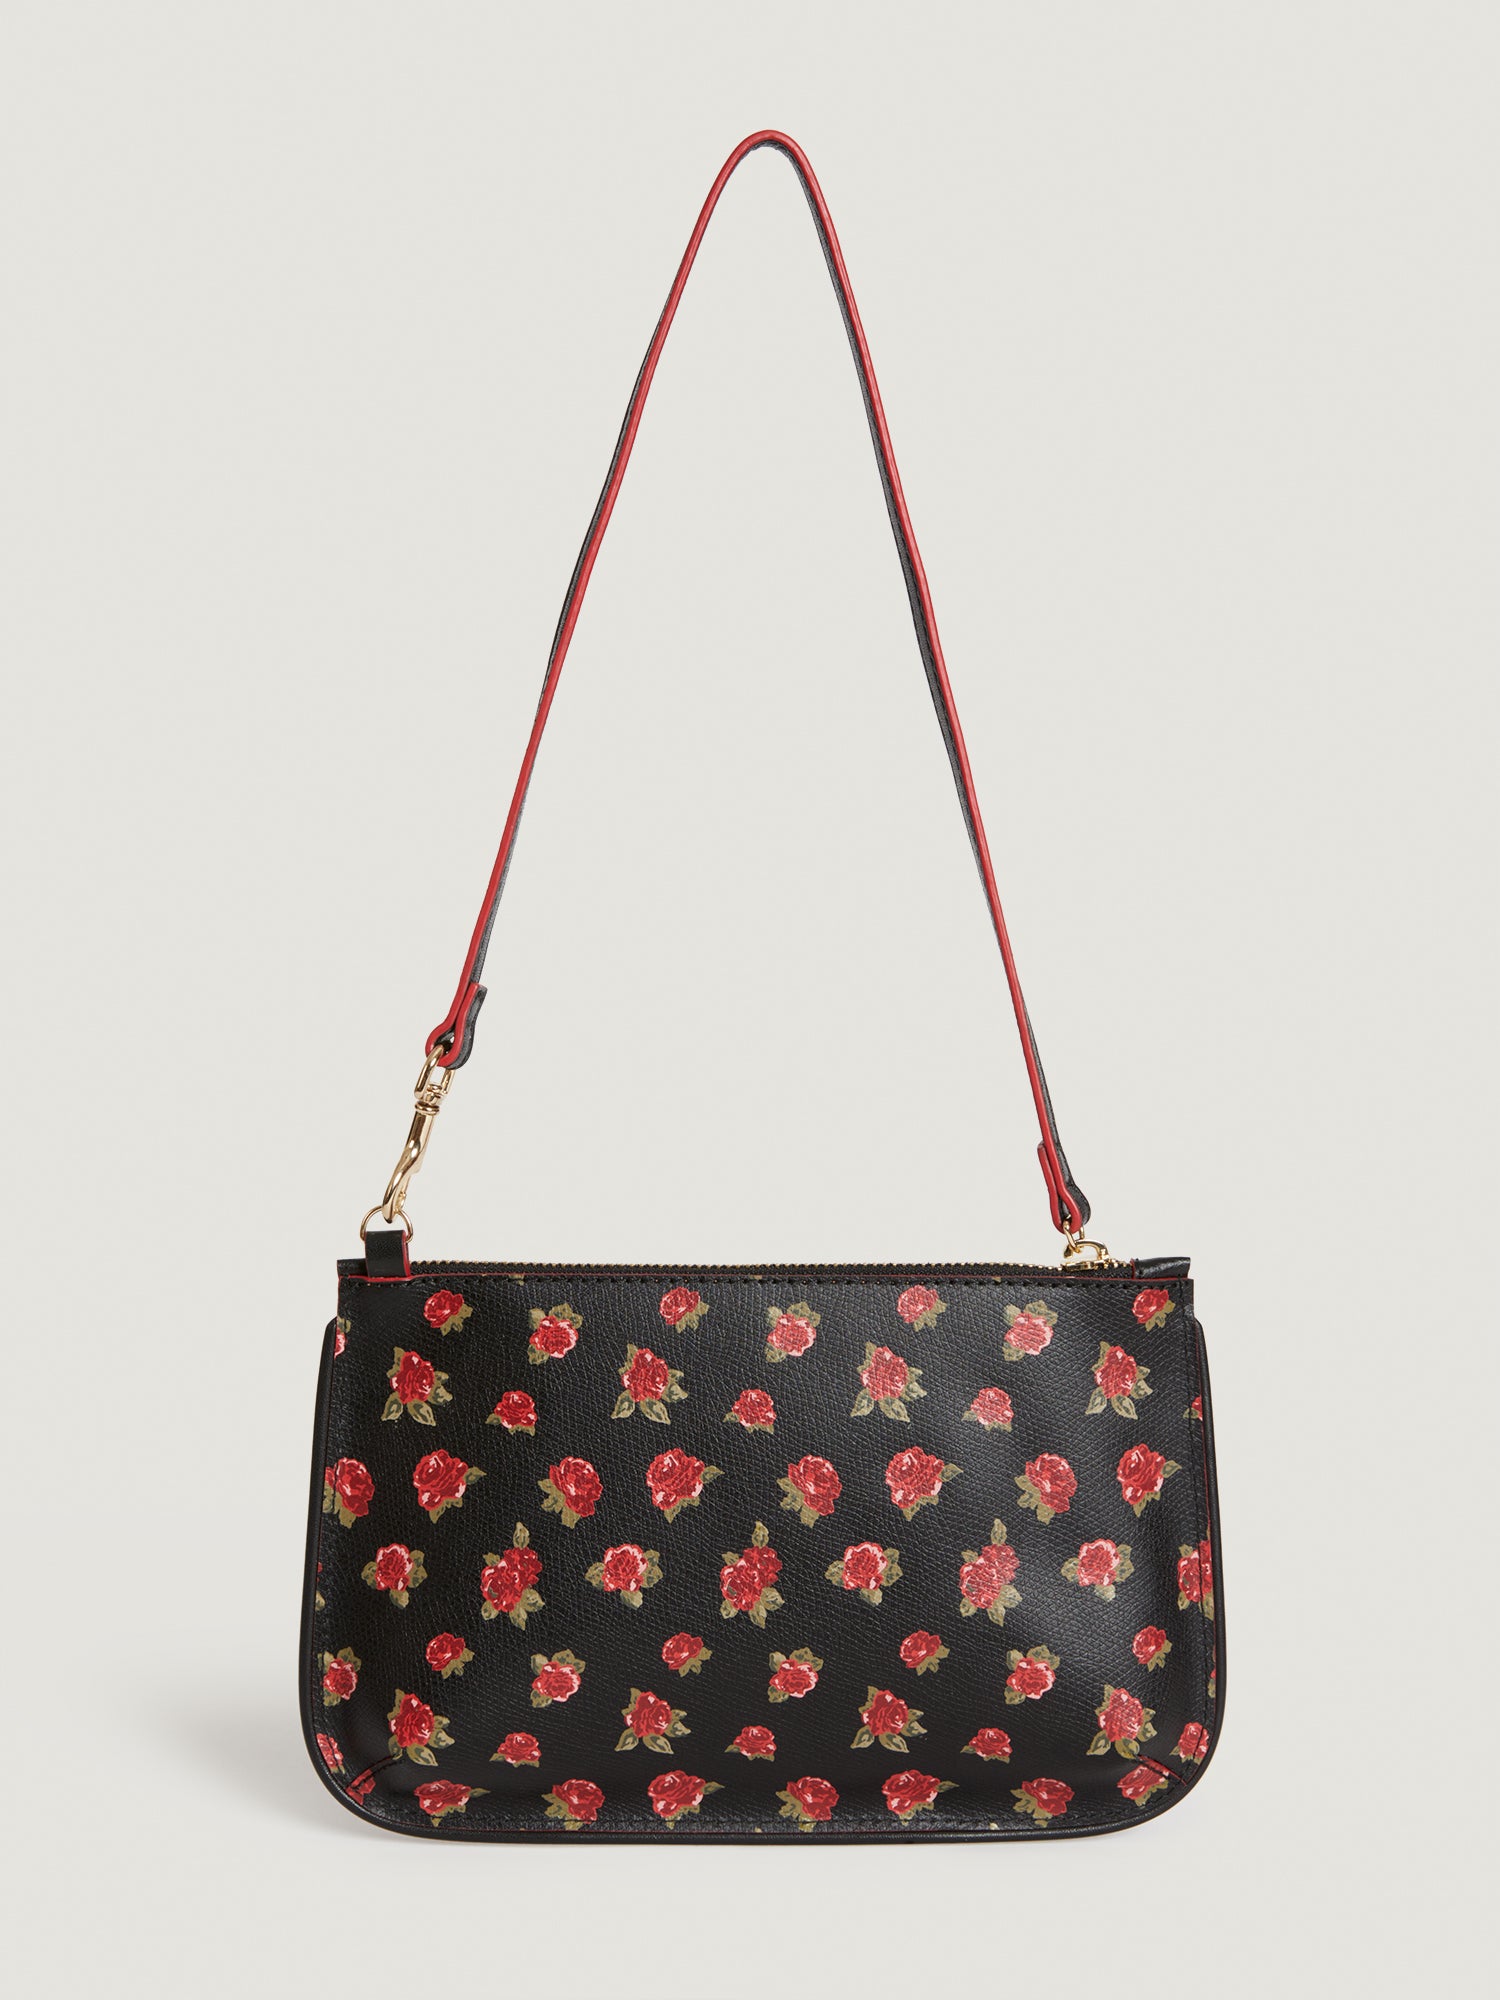 Mini clutch bag in floral printed leather | Rouje • Rouje Paris